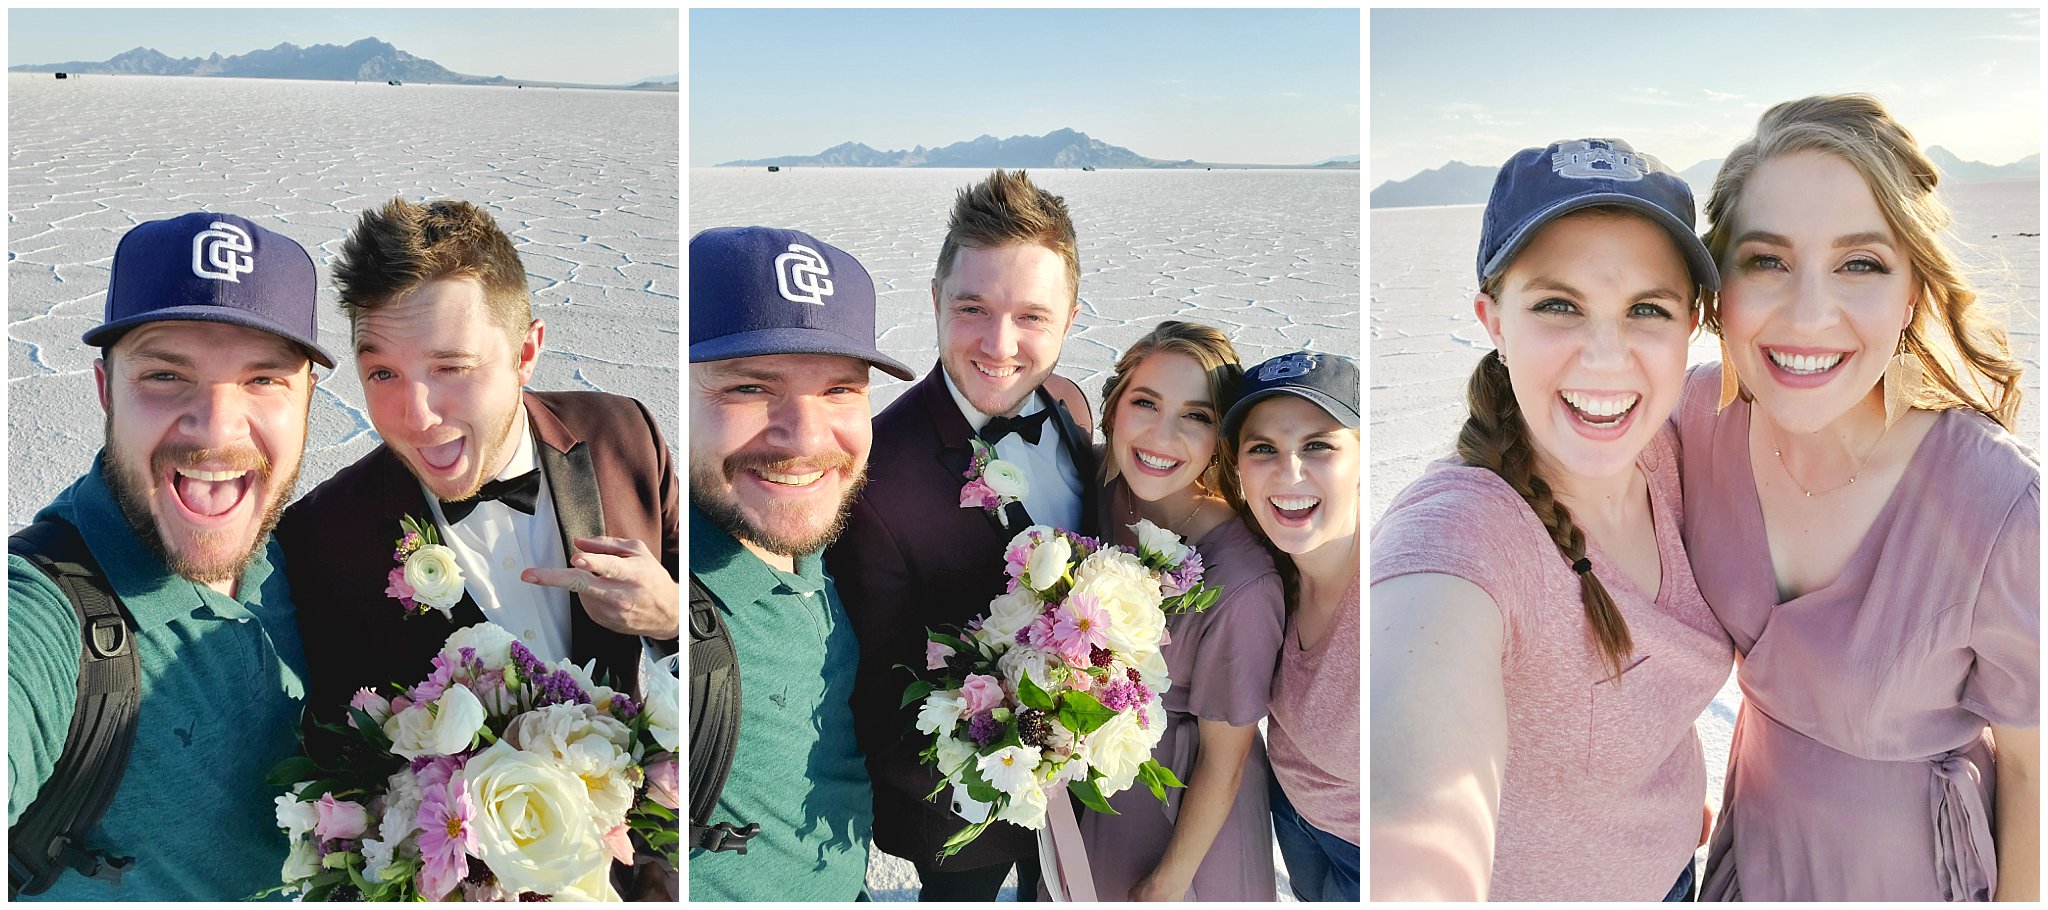 Jessie and Dallin with couple at the Salt Flats